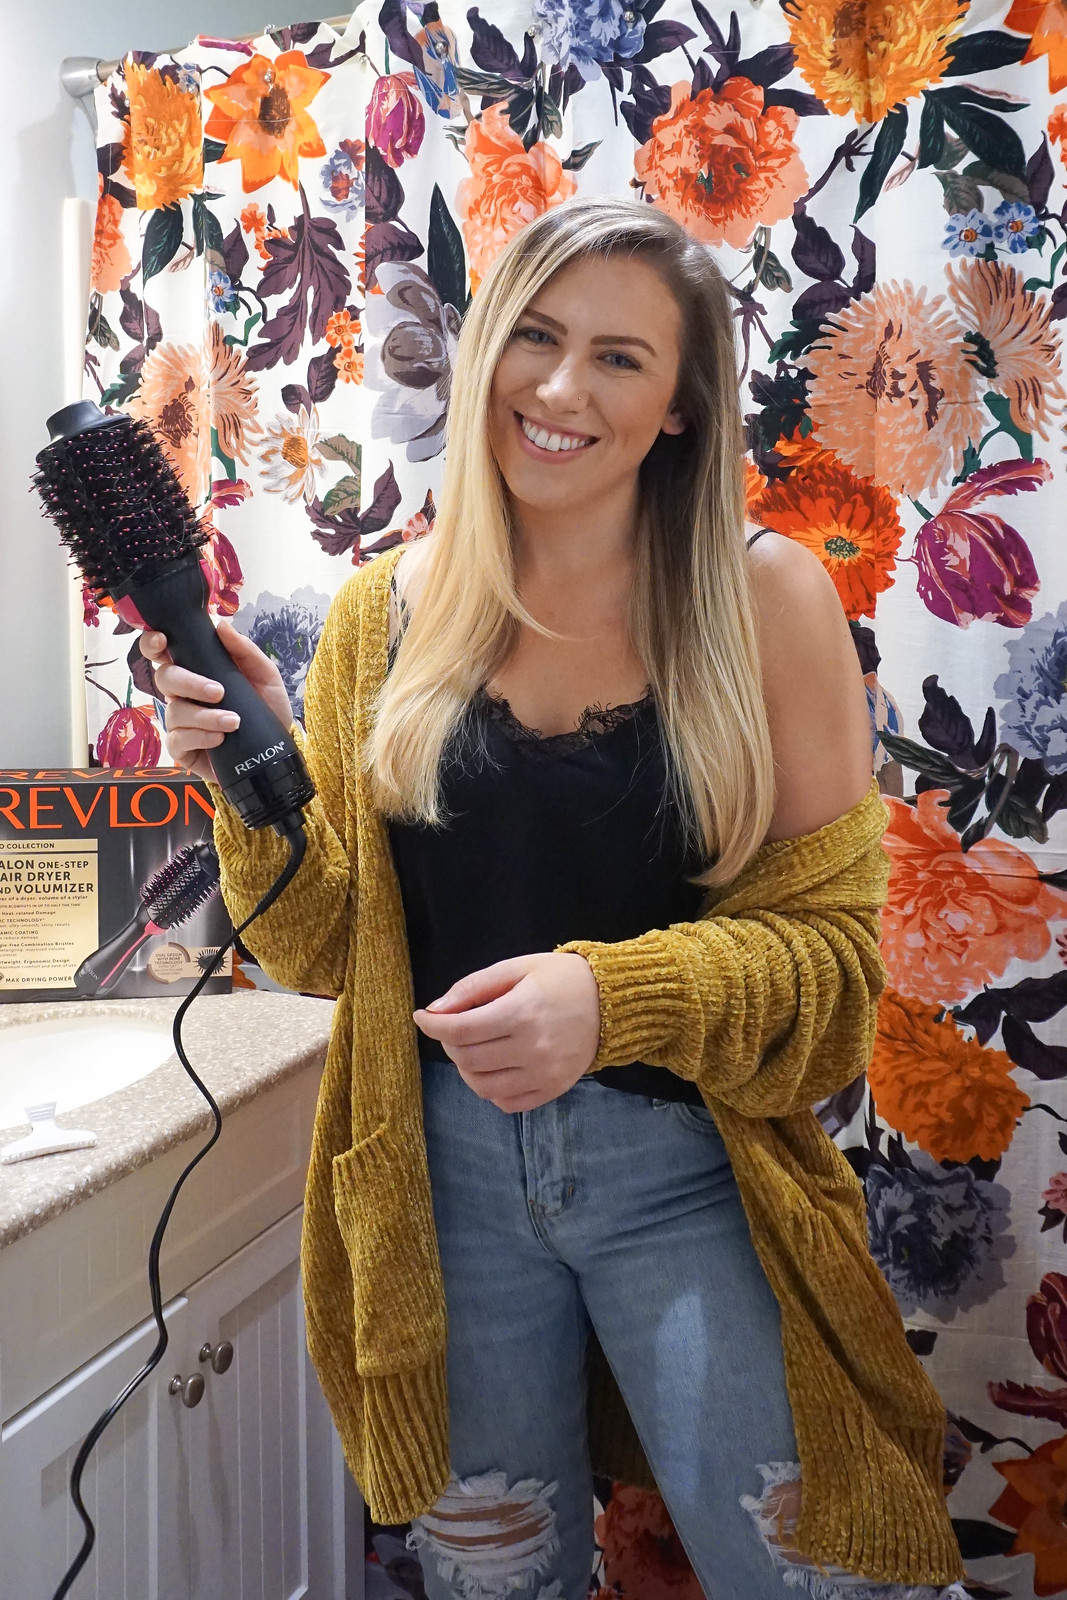 How to Get a Salon Like Blow Out At Home Revlon One-Step Hair Dryer & Volumizing Styler